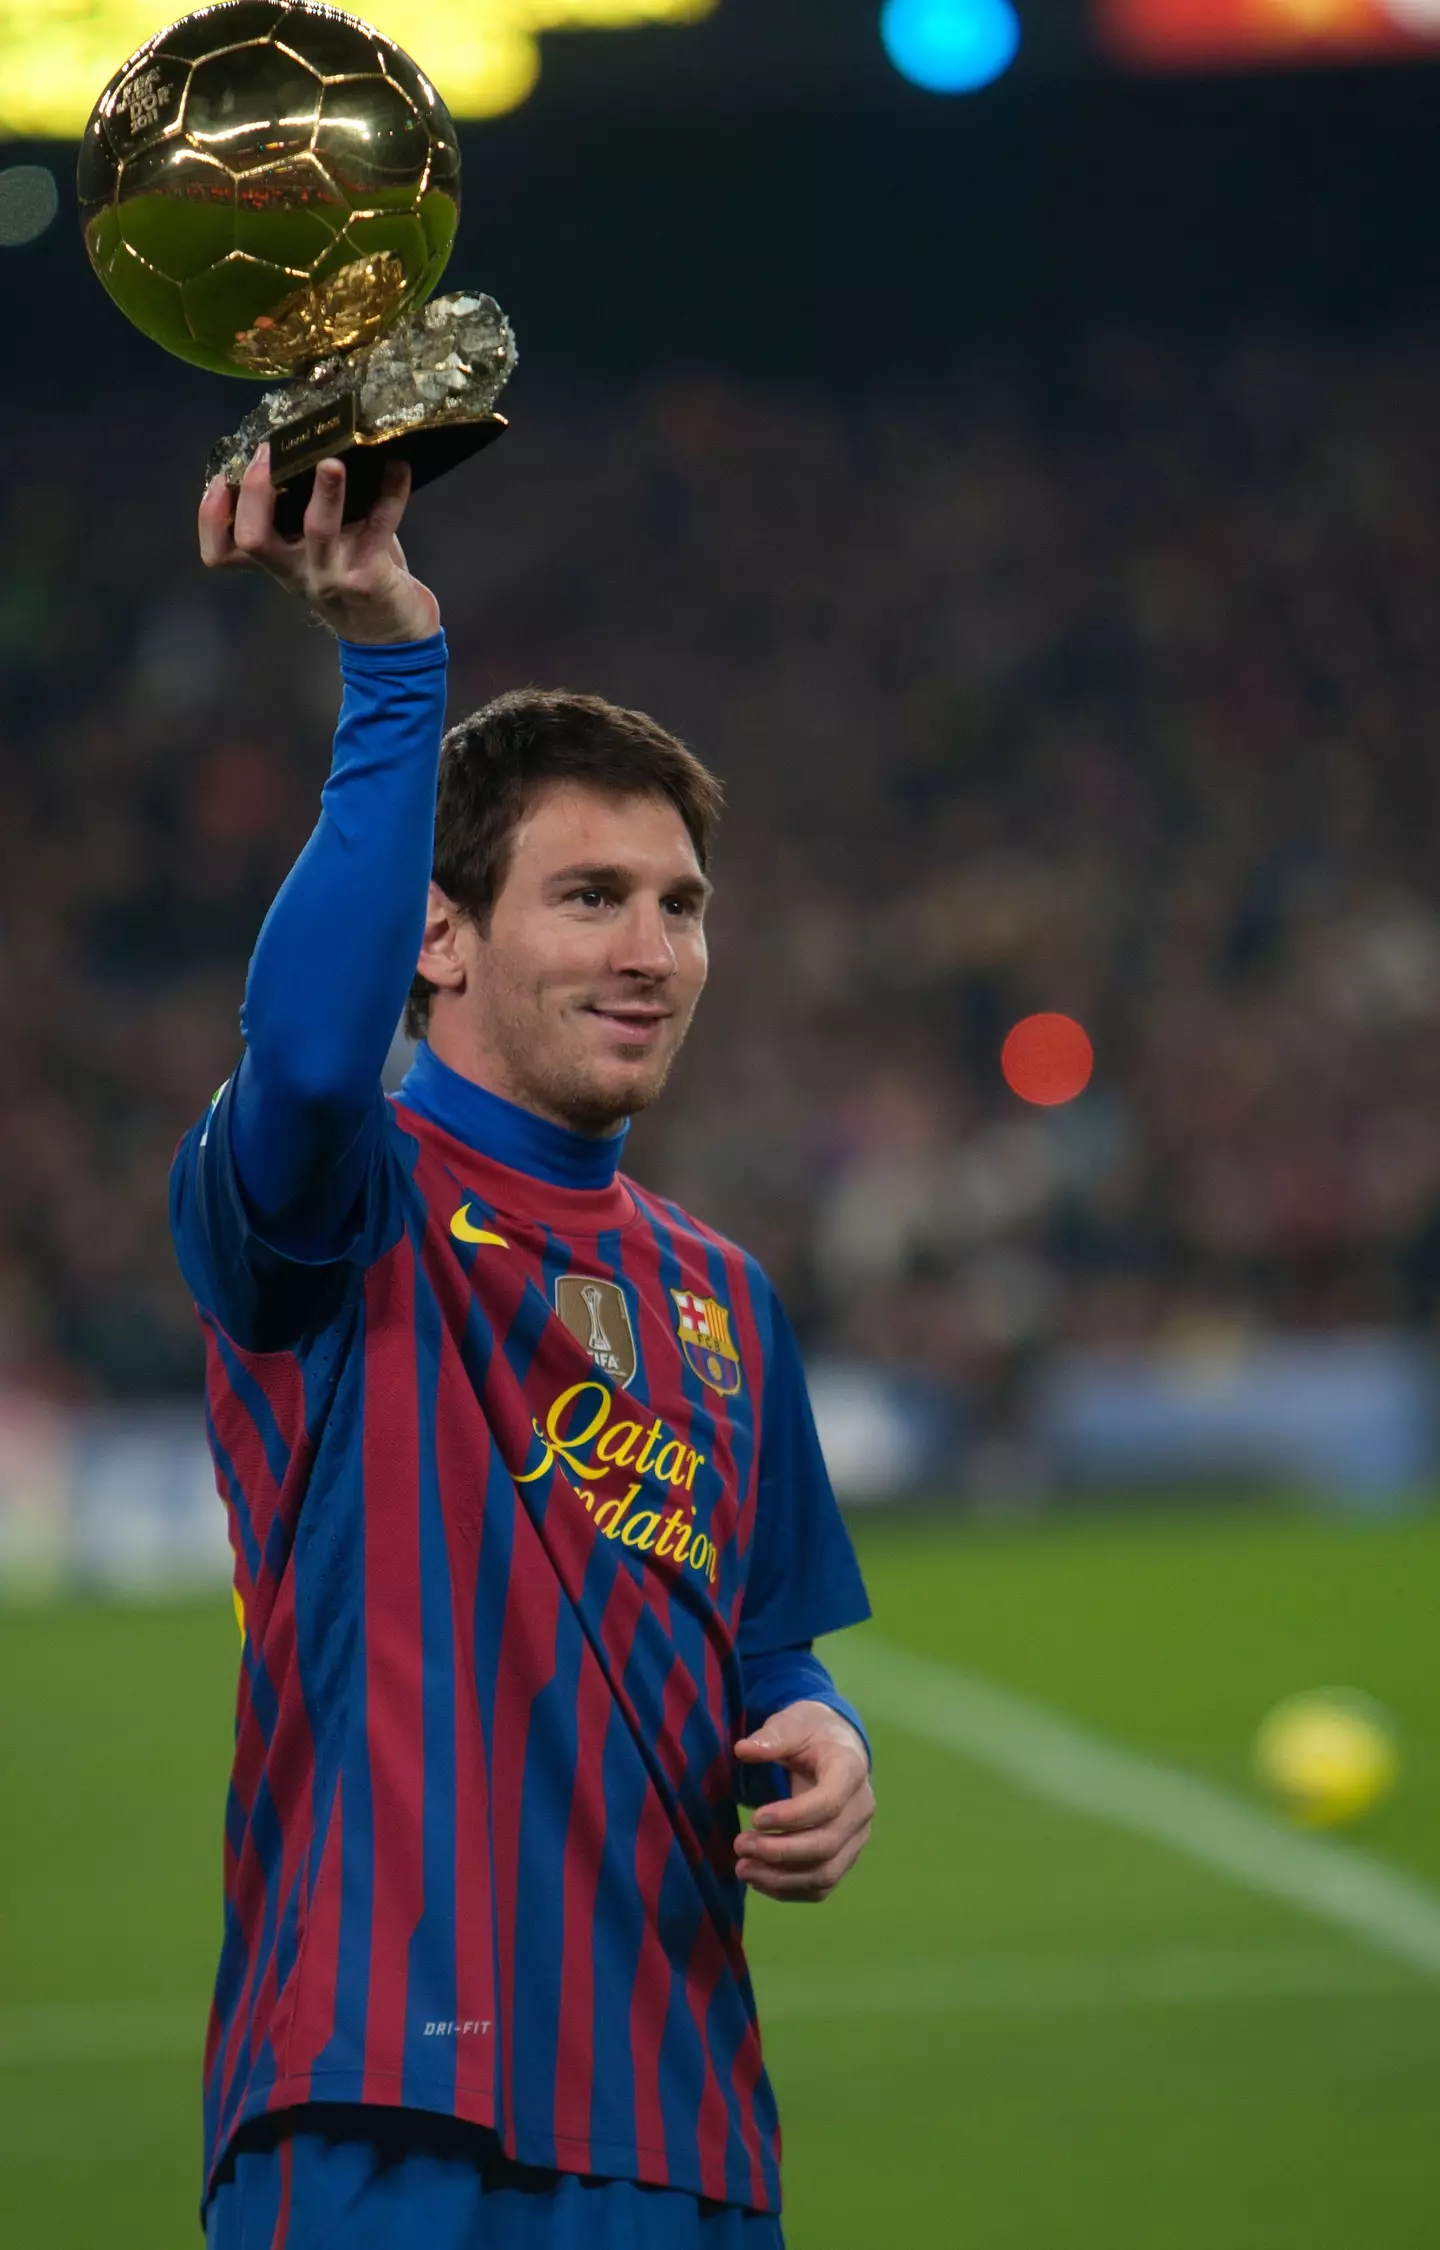 Lionel Messi has won more Balon d'Ors than any other player (7) (Image Credit : Alamy)